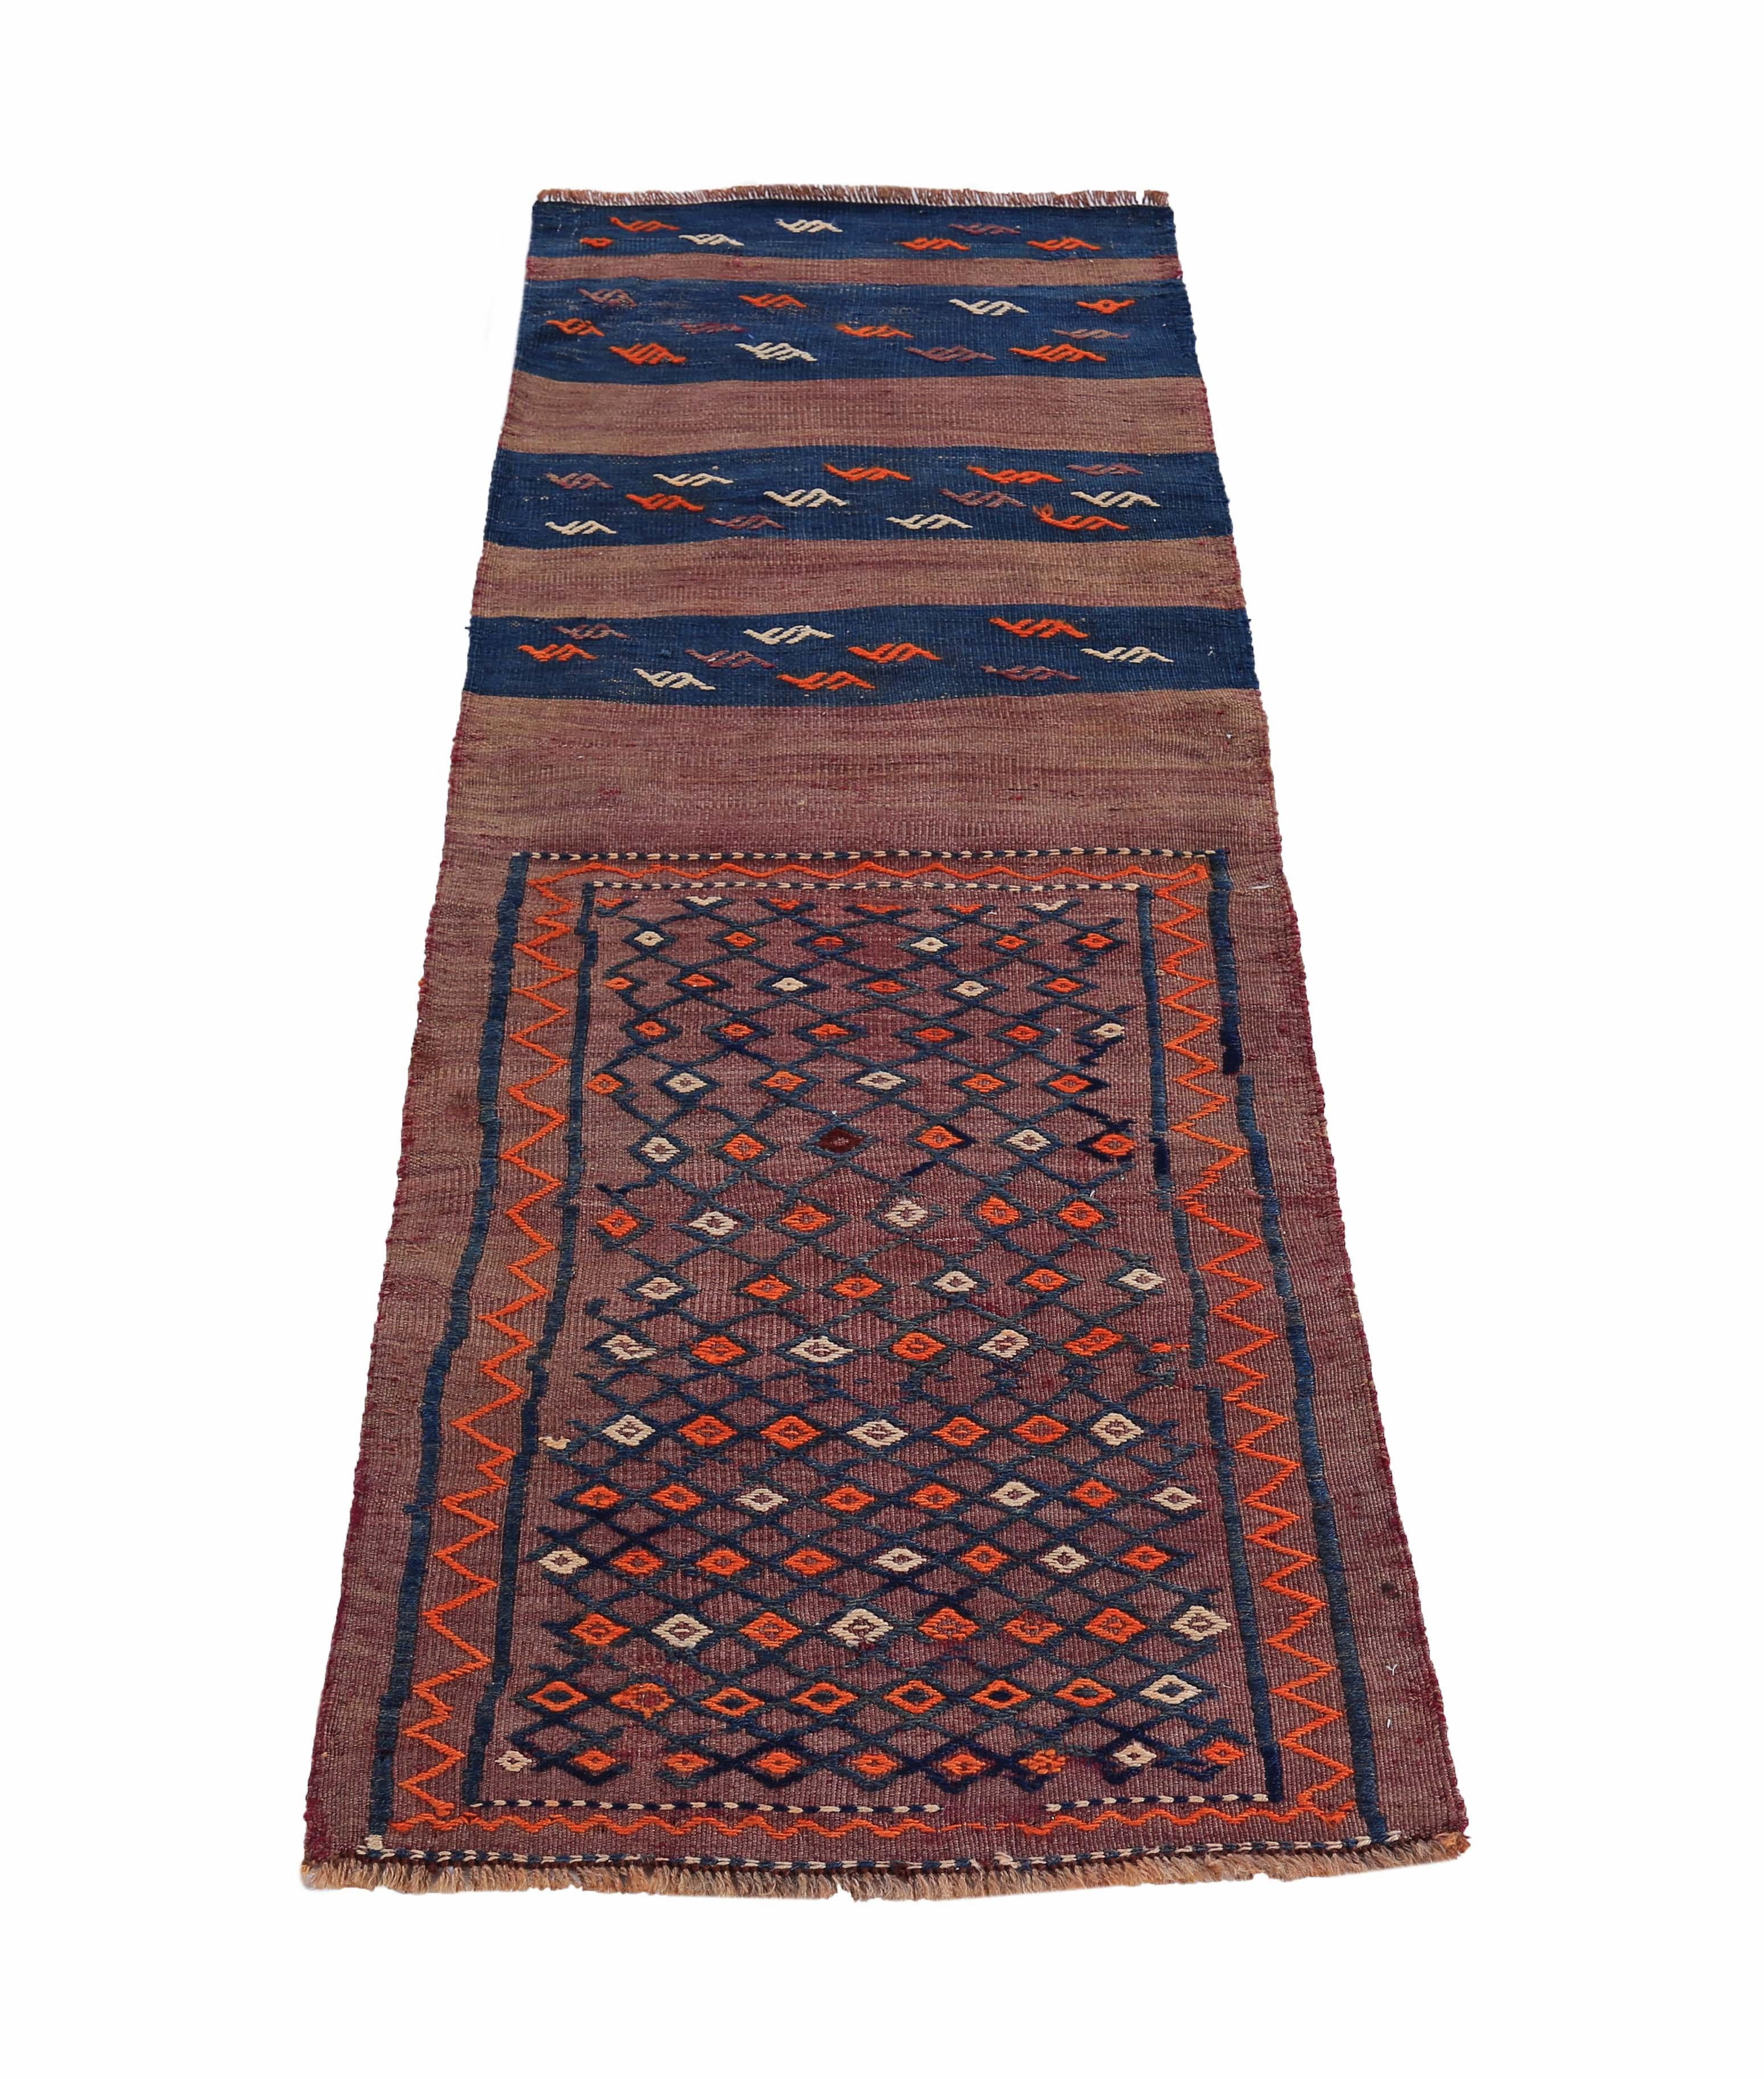 Turkish rug handwoven from the finest sheep’s wool and colored with all-natural vegetable dyes that are safe for humans and pets. It’s a traditional Kilim flat-weave design featuring navy and orange tribal design patterns on a red field. It’s a